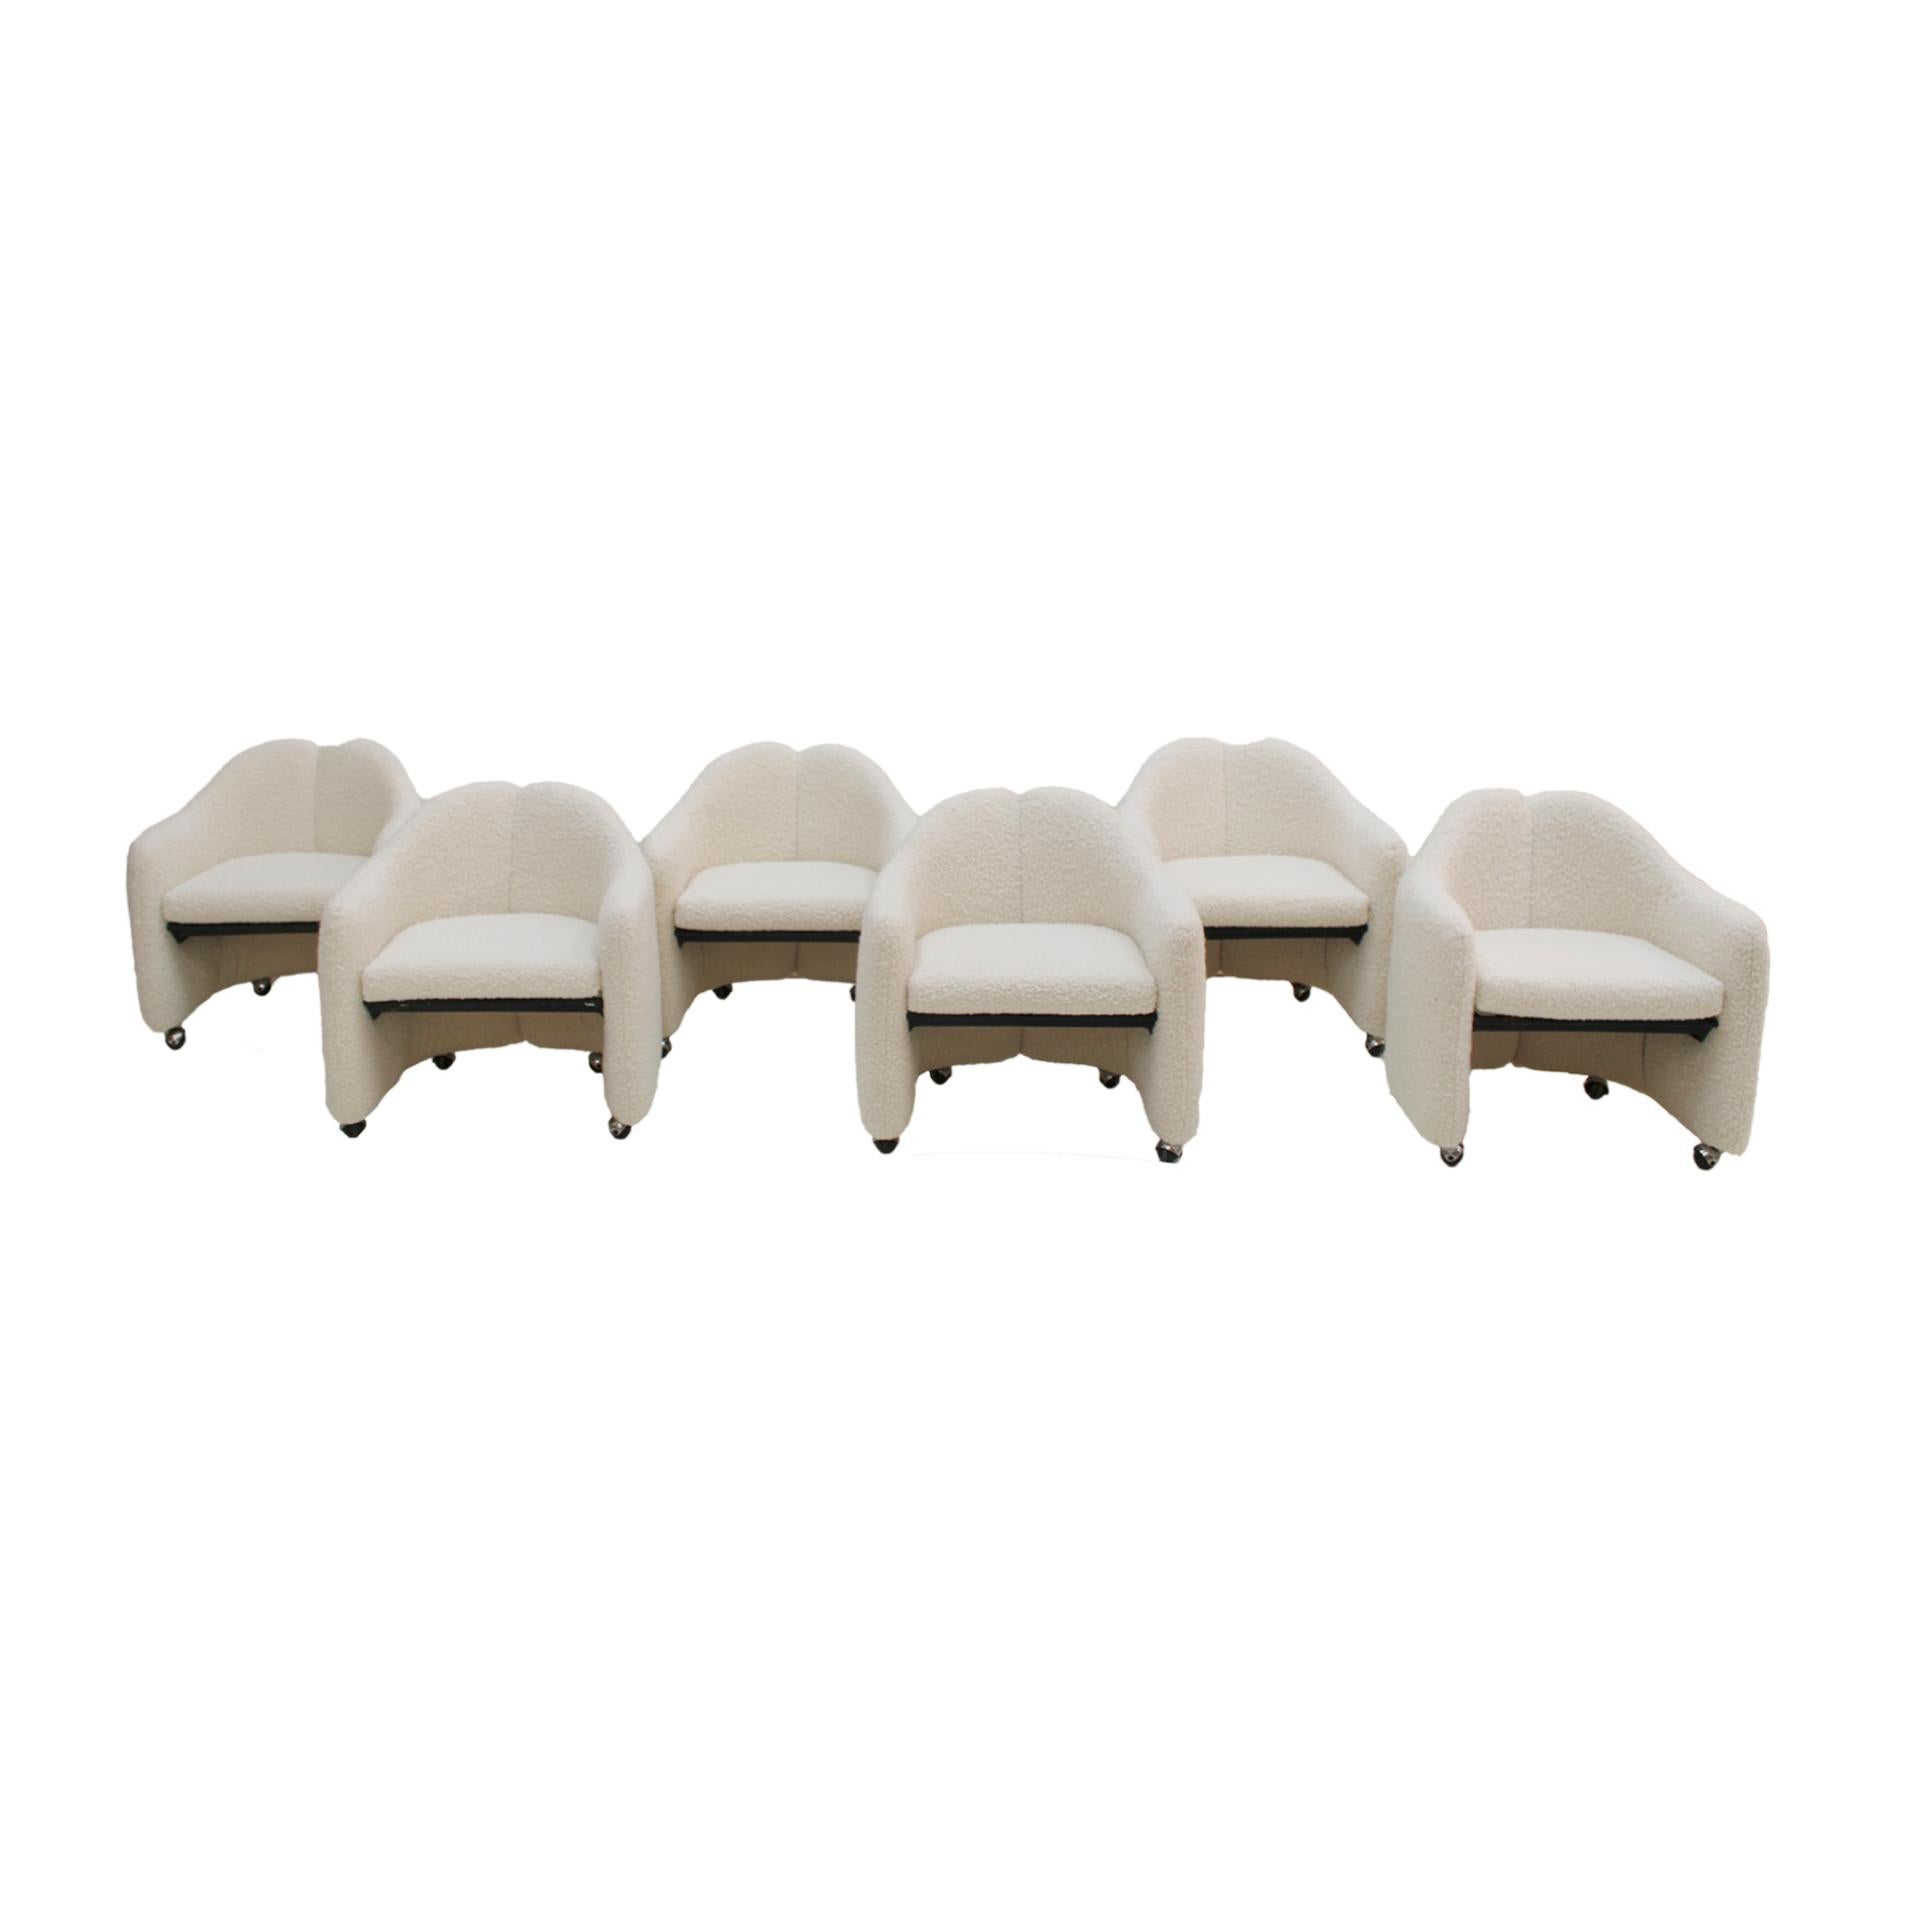 Set of six PS 142 chairs designed by Eugenio Gerli and produced by Tecno. Structure made of solid metal and upholstered with white bouclé wool. Italy 1960s. Tecno Milano label.

Our main target is customer satisfaction, so we include in the price